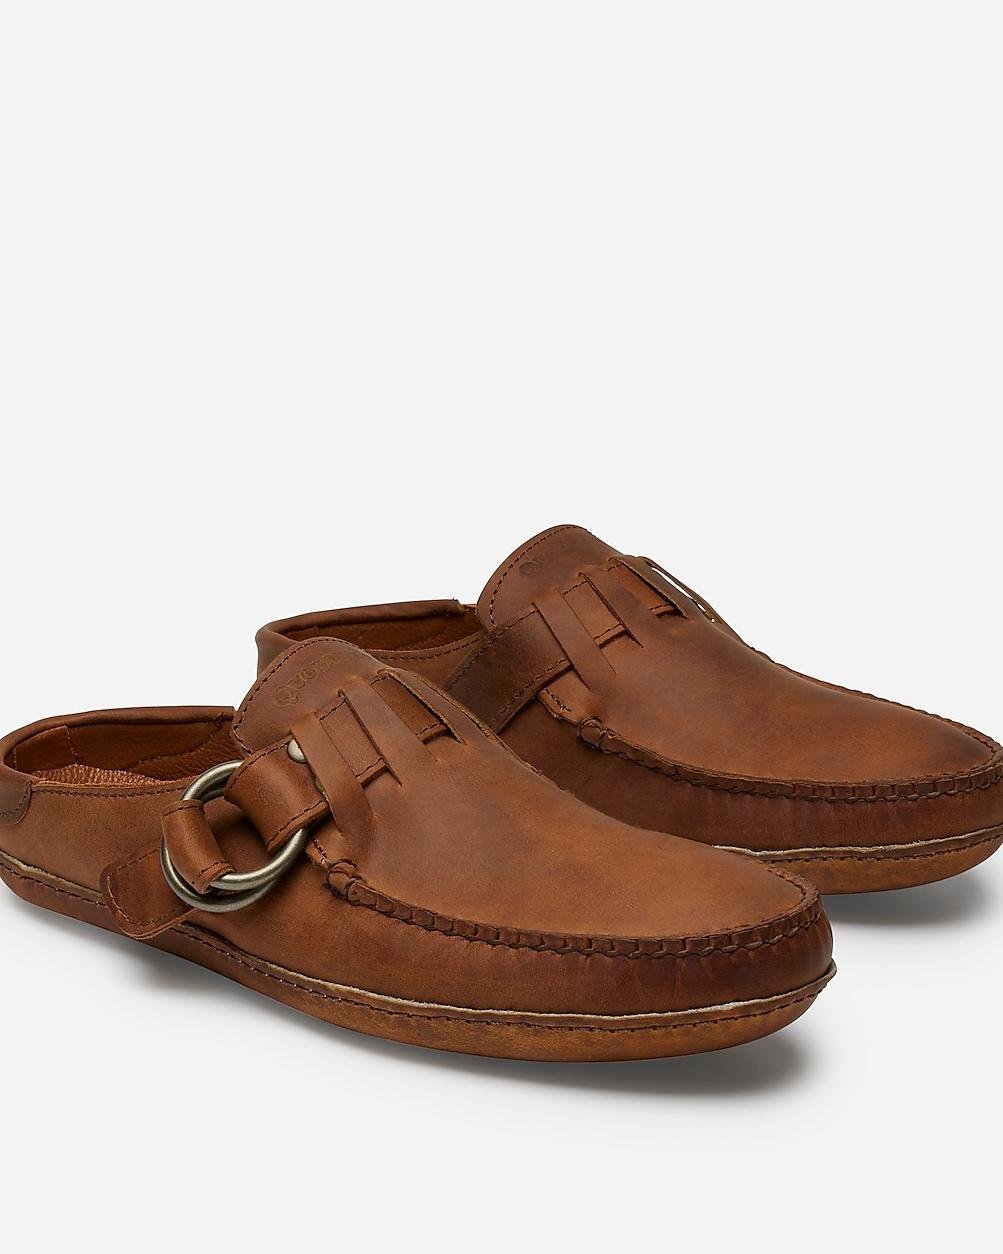 Quoddy® ring mules by J.CREW